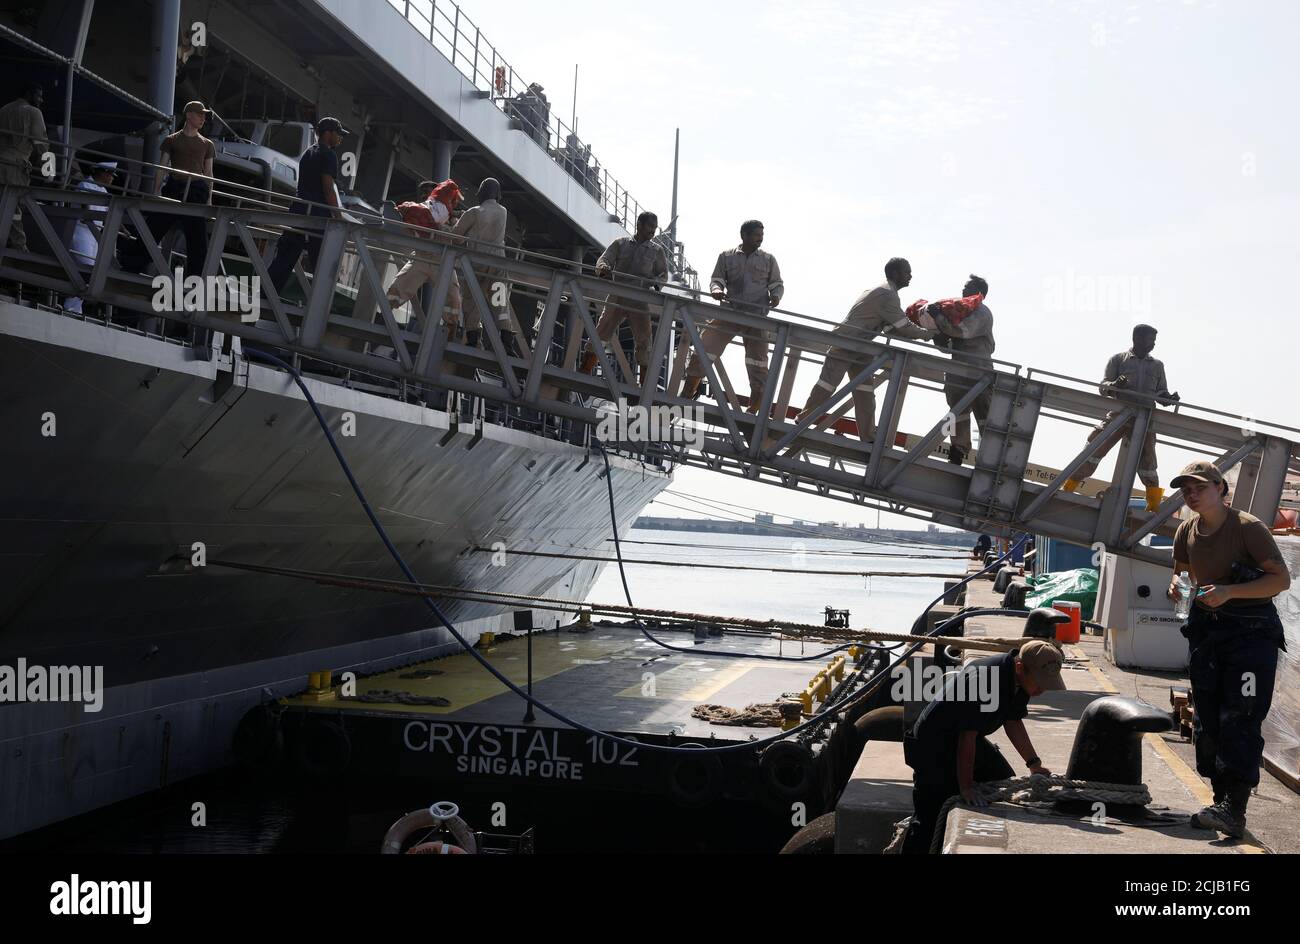 Port workers load food supplies onto the USS Blue Ridge (LCC 19), flagship of the U.S. Navy's 7th Fleet, at Changi Naval Base in Singapore May 9, 2019. REUTERS/Edgar Su Stock Photo